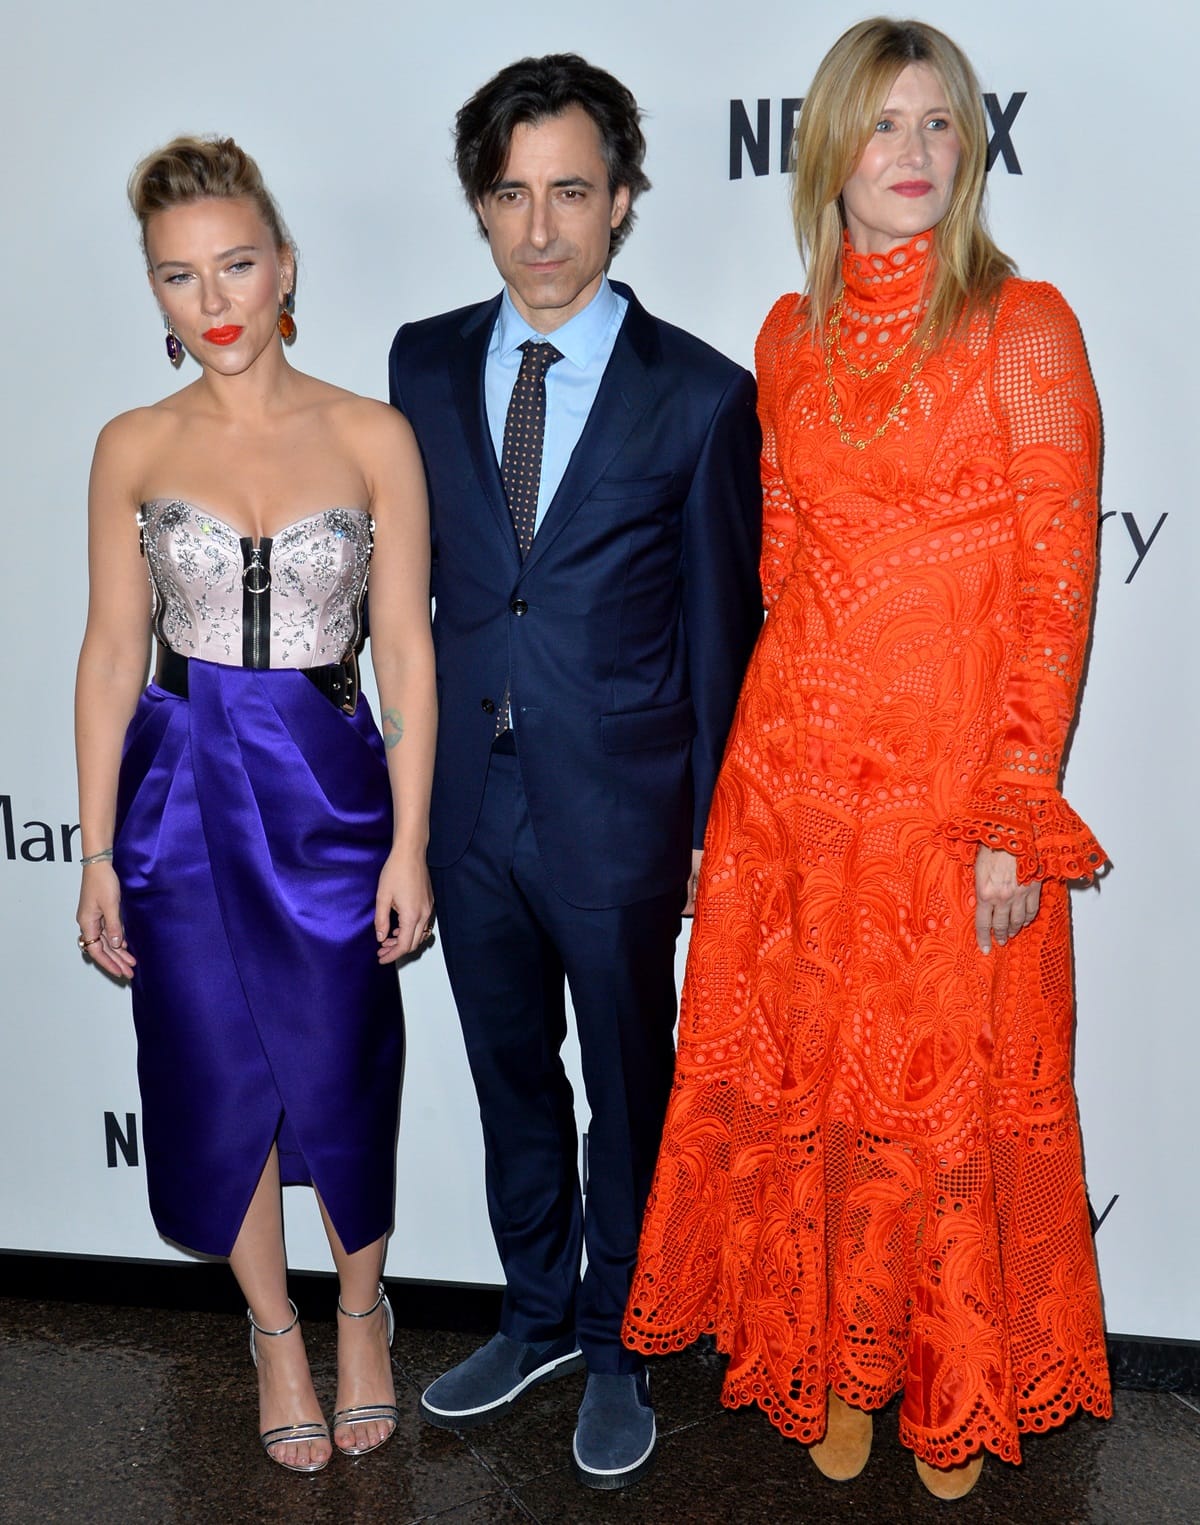 Scarlett Johansson, who stands at 5ft 3 (160 cm), appeared shorter in comparison to Noah Baumbach, who measures 5′ 9″ (1.75 m), and Laura Dern, who stands at 5ft 9 ½ (176.5 cm)